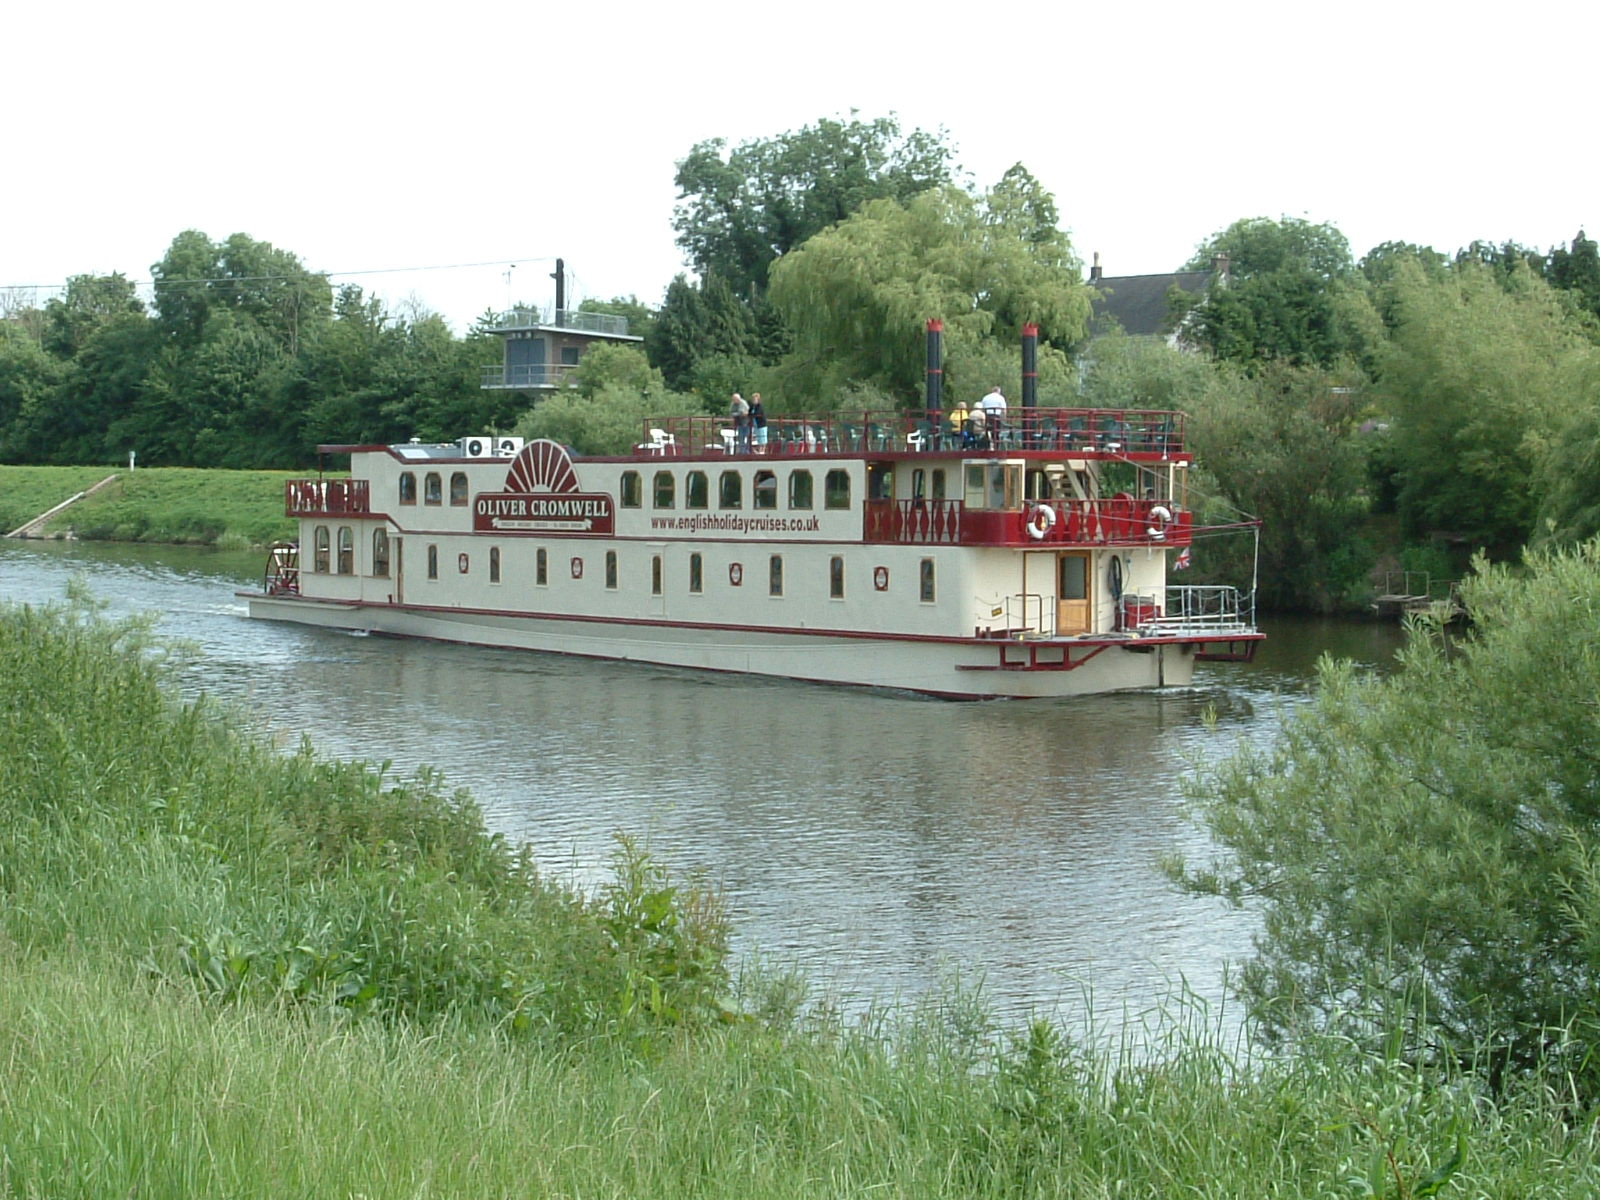 A tourist boat on the River Severn